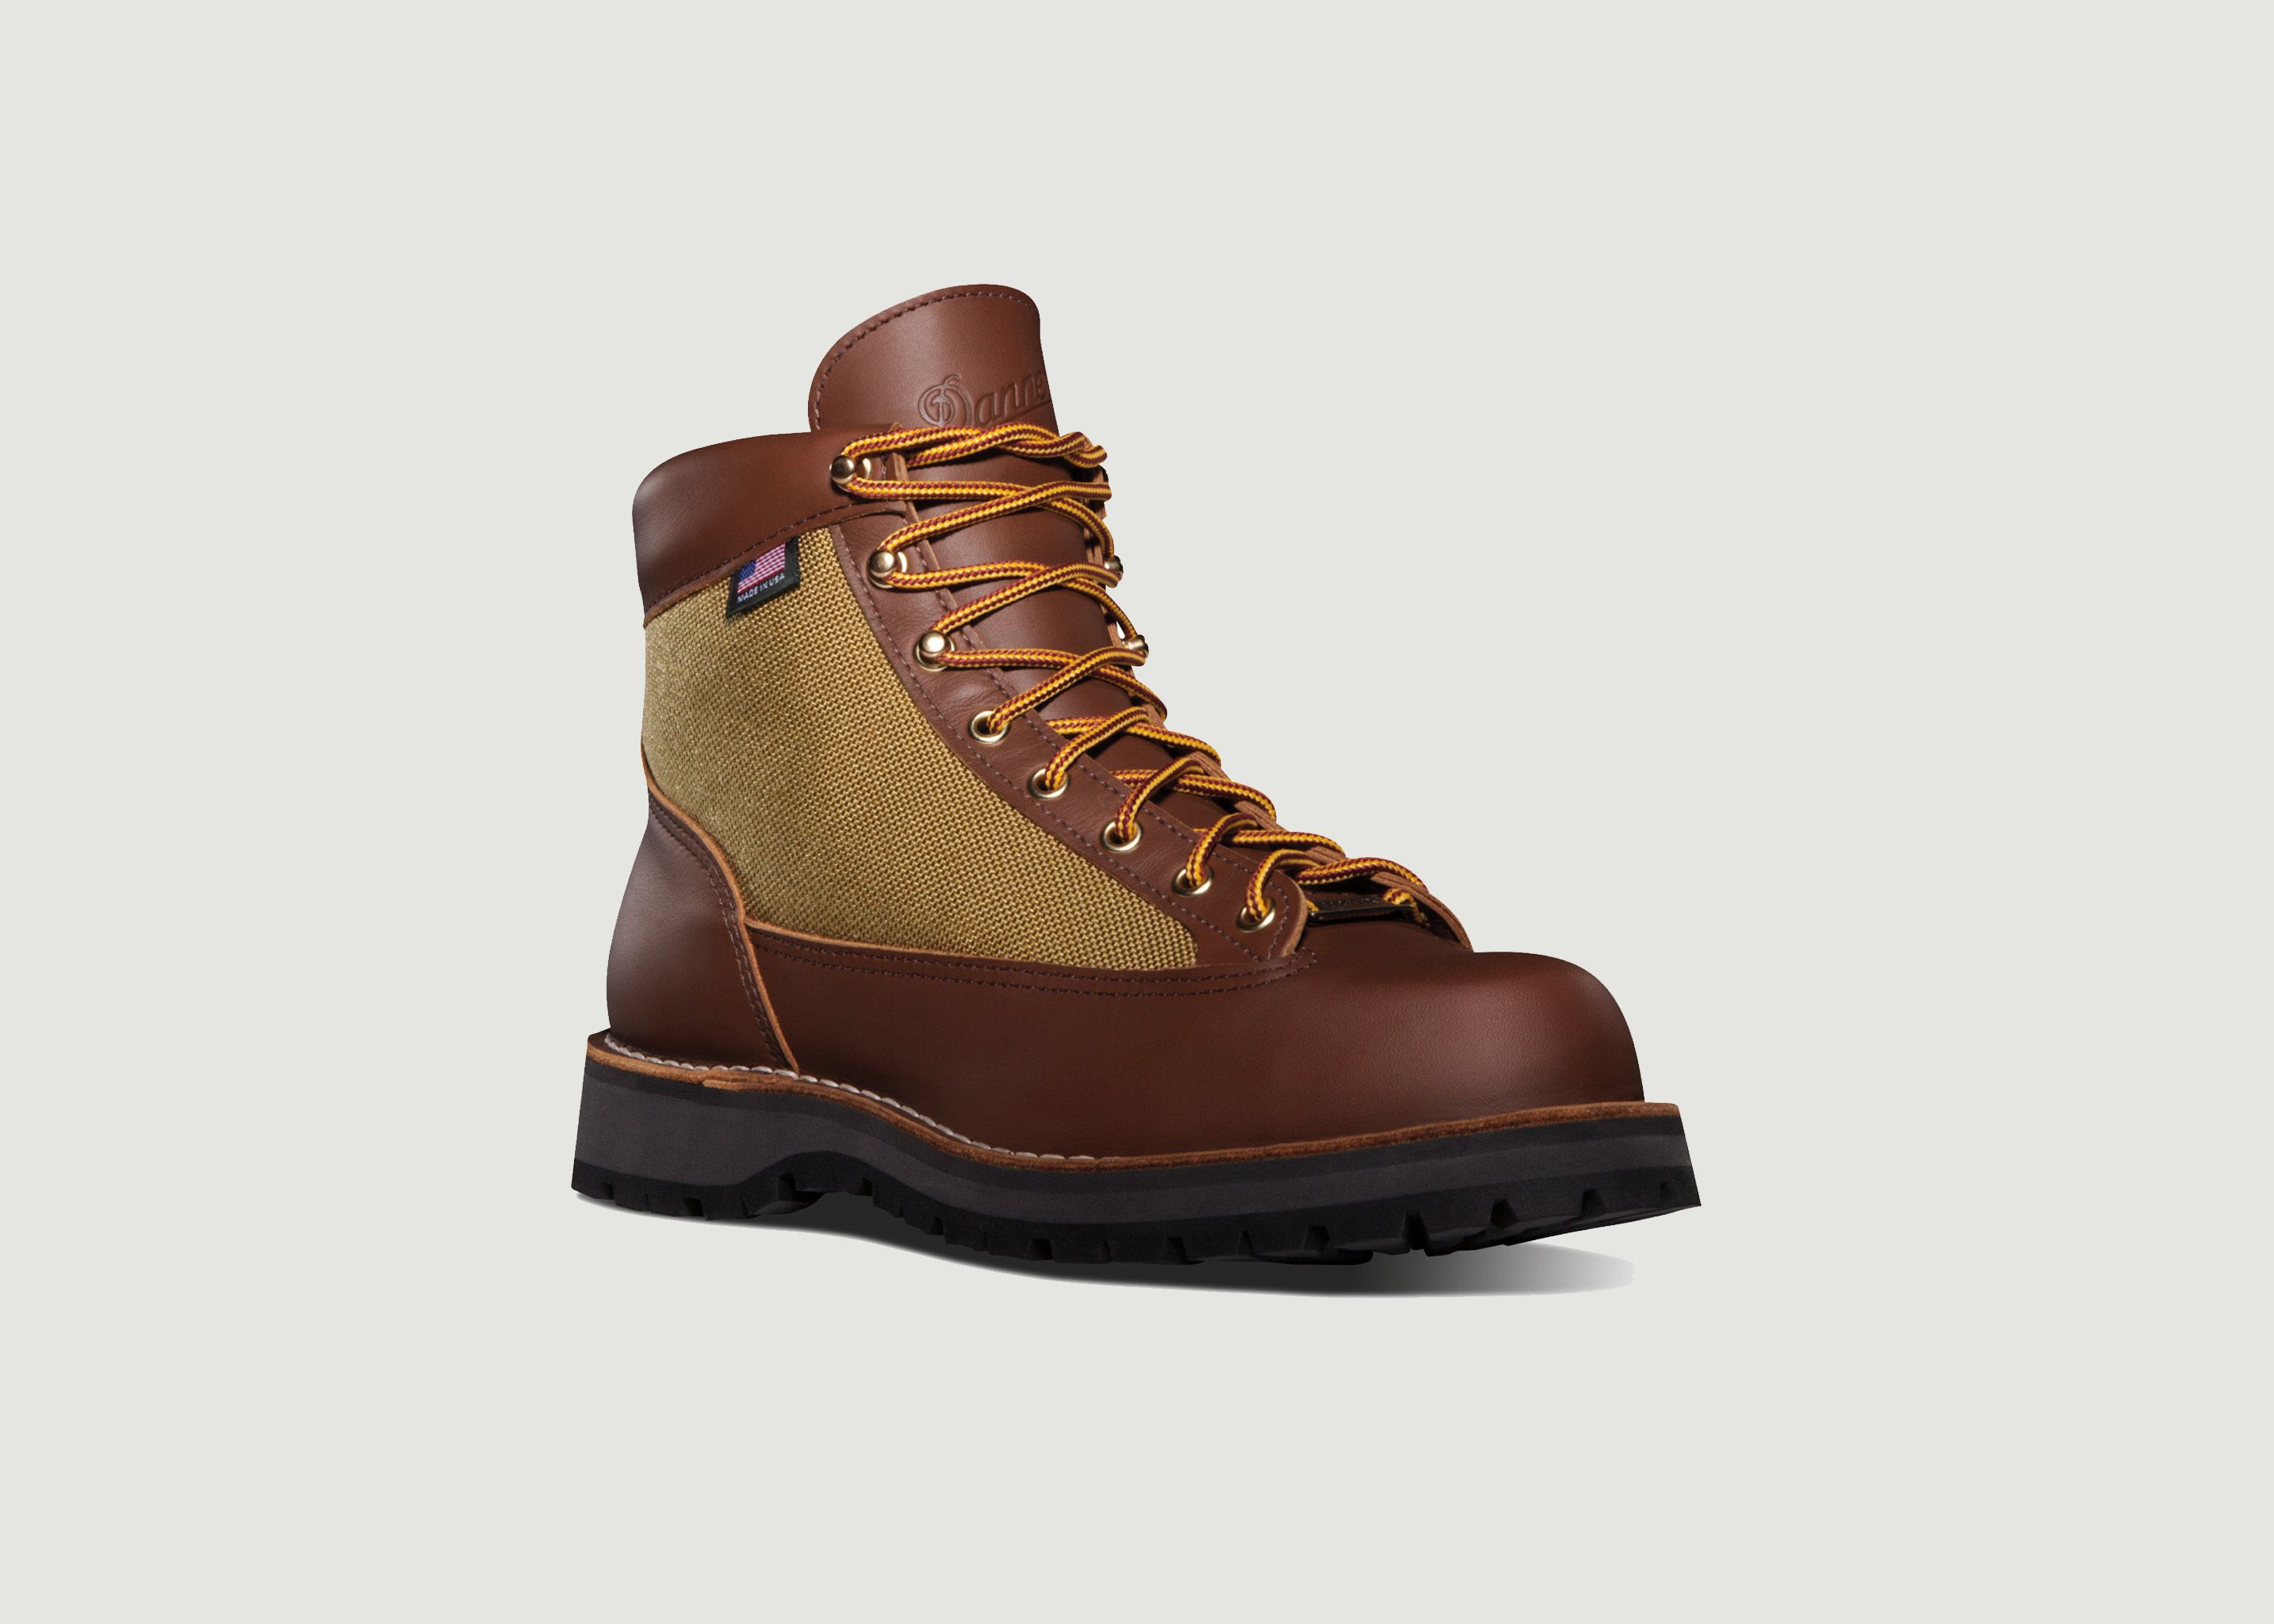 Danner Light fabric and leather boots - Danner